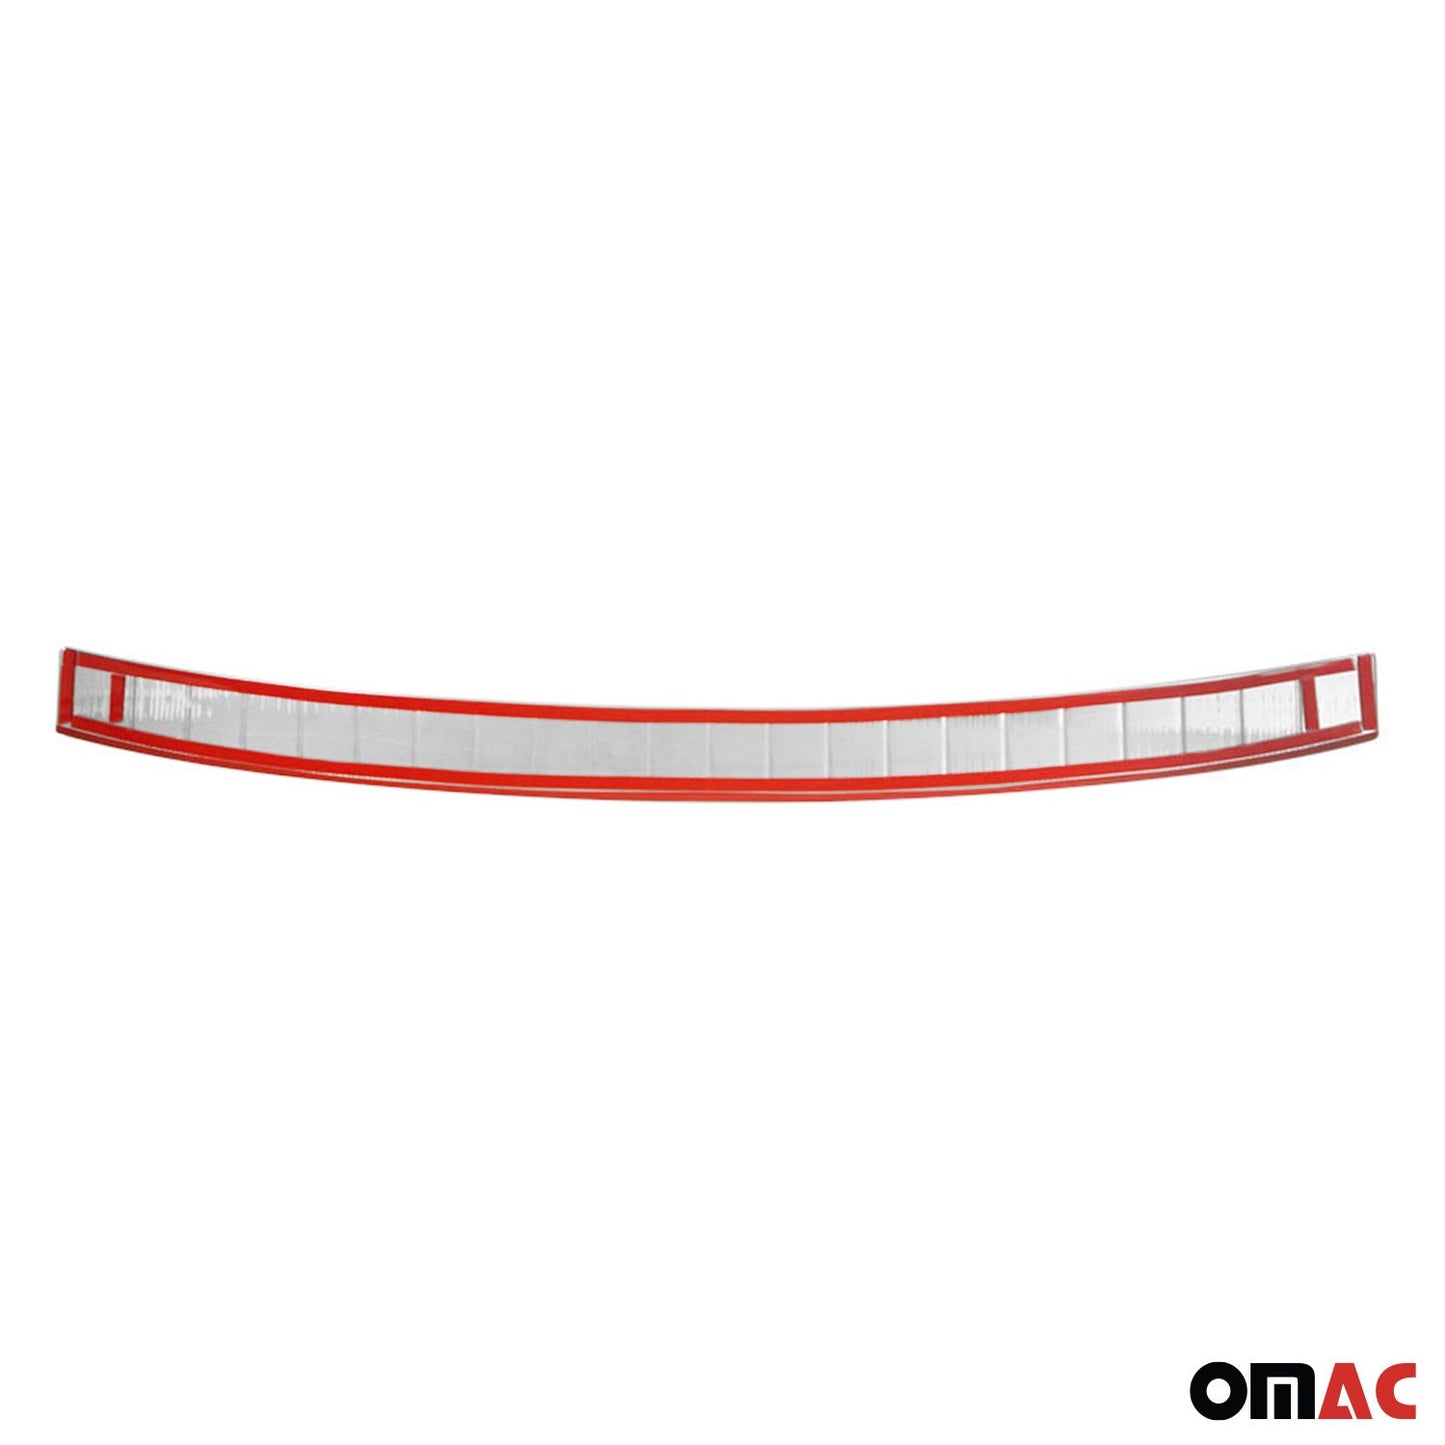 OMAC Rear Bumper Guard for BMW X5 F15 2014-2018 Trunk Sill Protector Brushed 1221094T